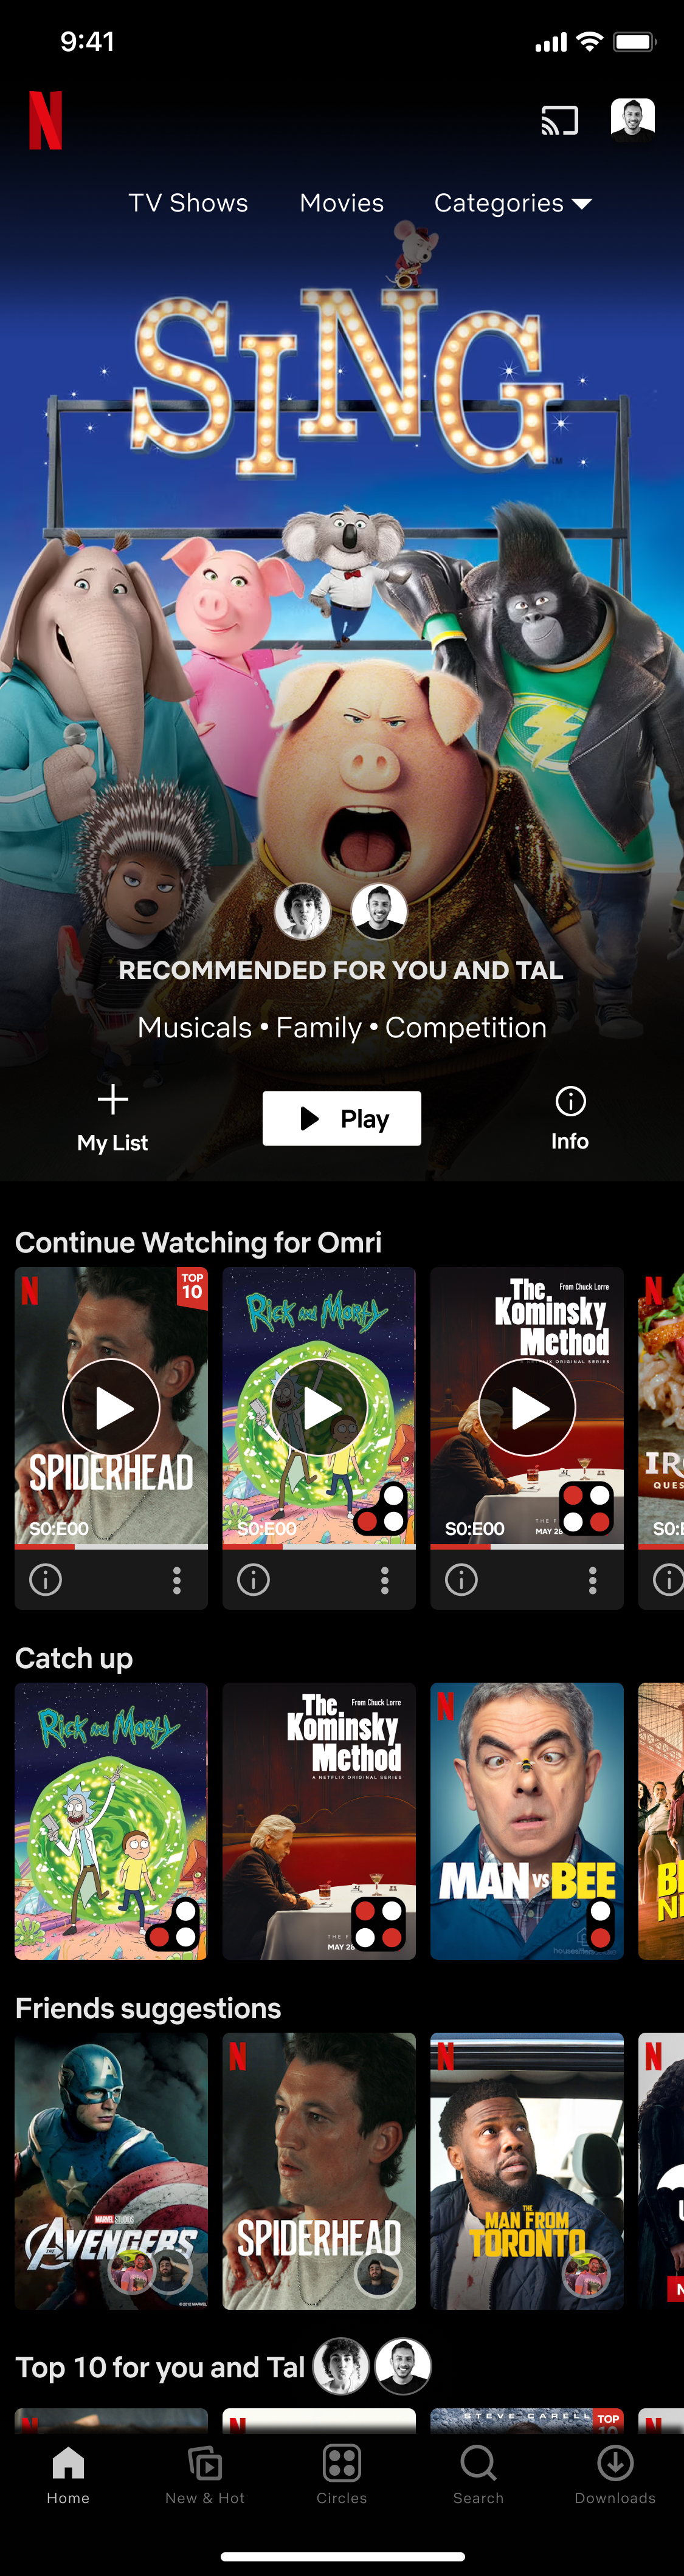 9 ways to watch movies with friends on Netflix, Disney, Hulu and more -  Polygon